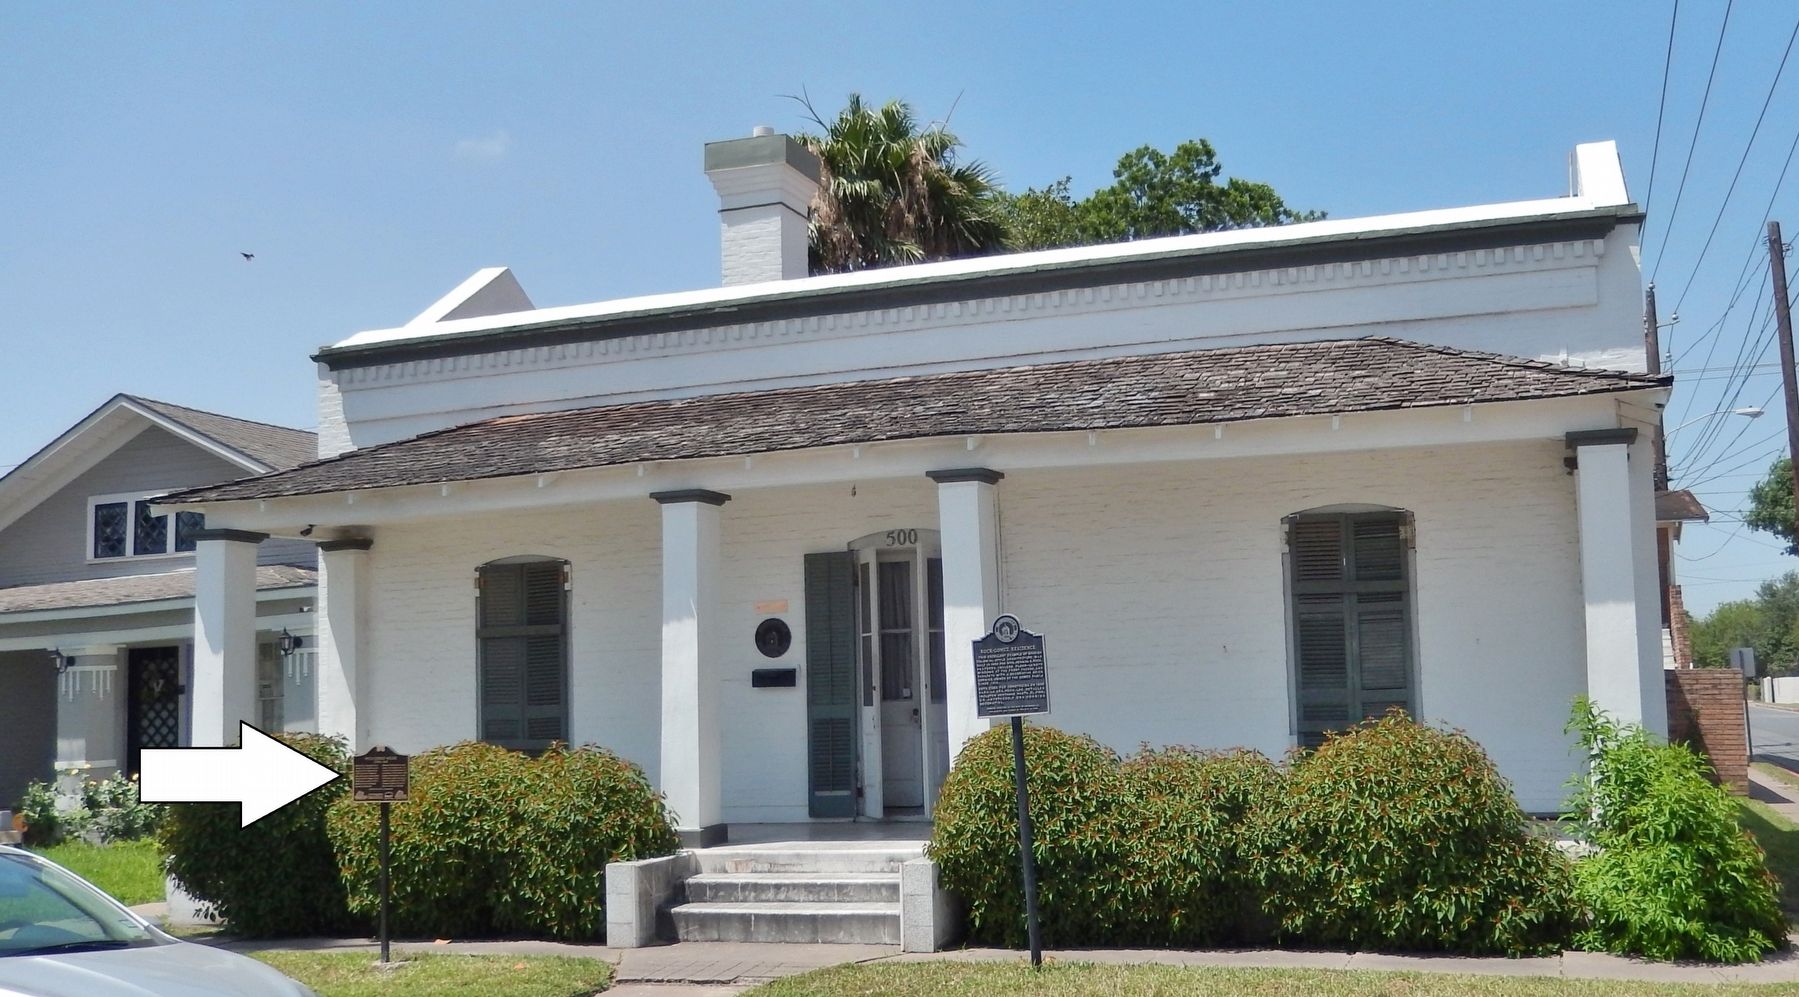 Rock/Gomez House (<i>marker visible on left; related marker on right</i>) image. Click for full size.